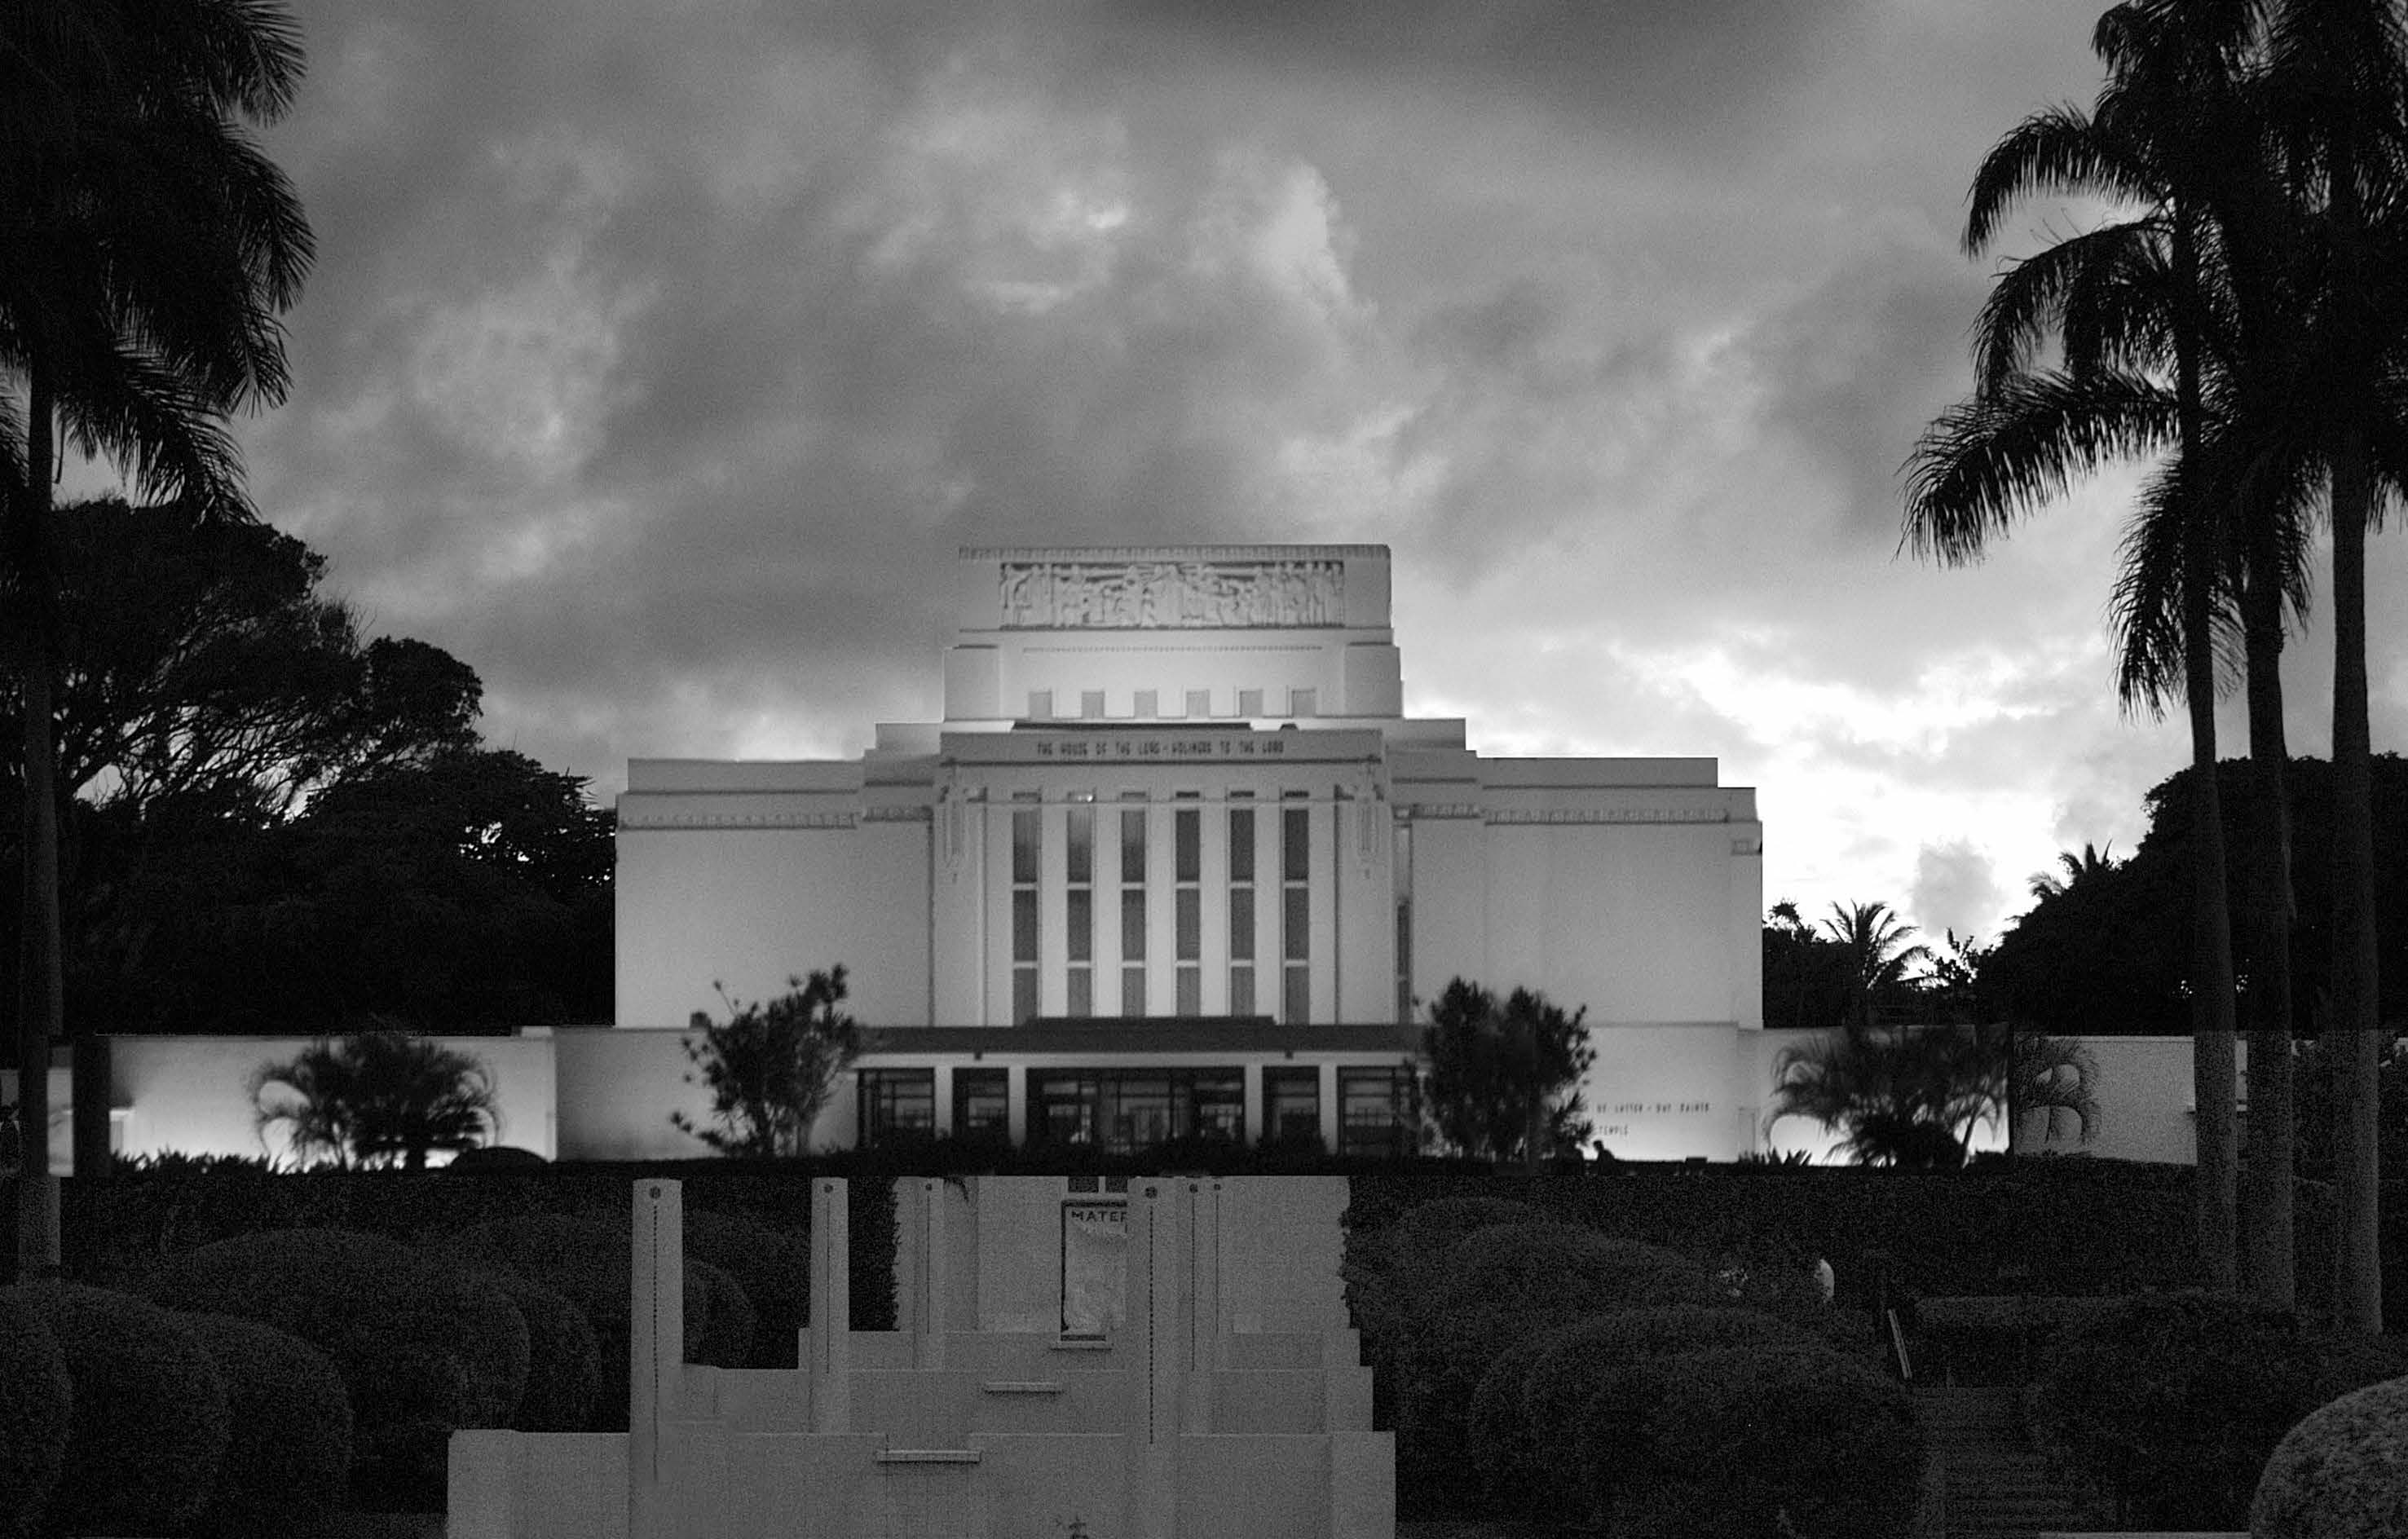 All-night temple sessions were introduced in the Hawaii Temple in 1979. Though discontinued the following year, the practice nearly eliminated the backlog of male names awaiting ordinance work at that time. Photo by Monique Saenz courtesy of BYU–Hawaii.